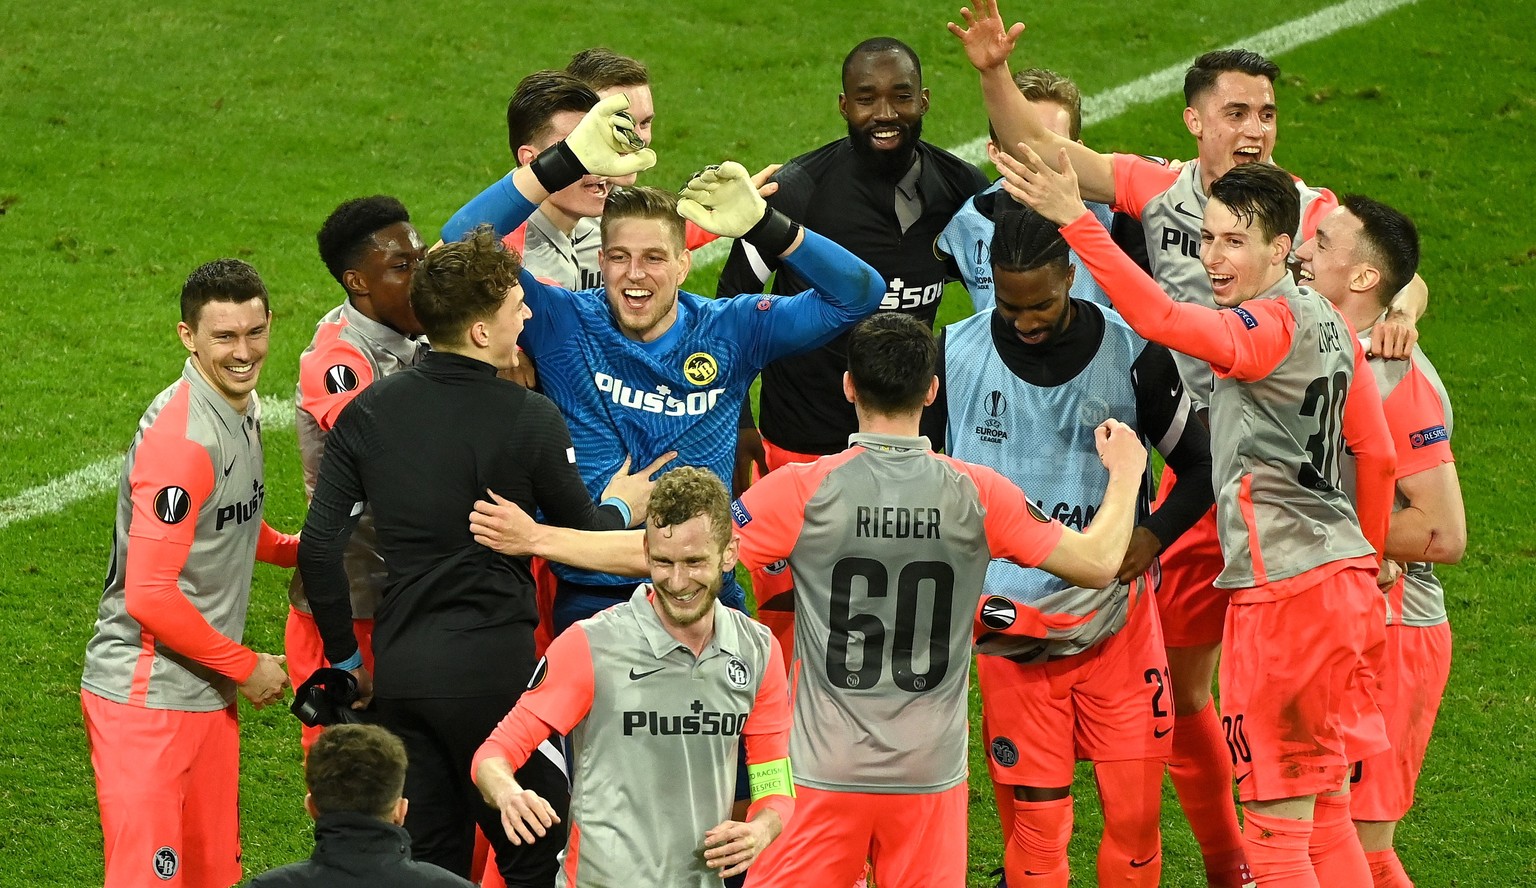 epa09037148 YB&#039;s team celebrates after winning the UEFA Europa League round of 32 second leg soccer match between Bayer Leverkusen and BSC Young Boys Bern in Leverkusen, Germany, 25 February 2021 ...